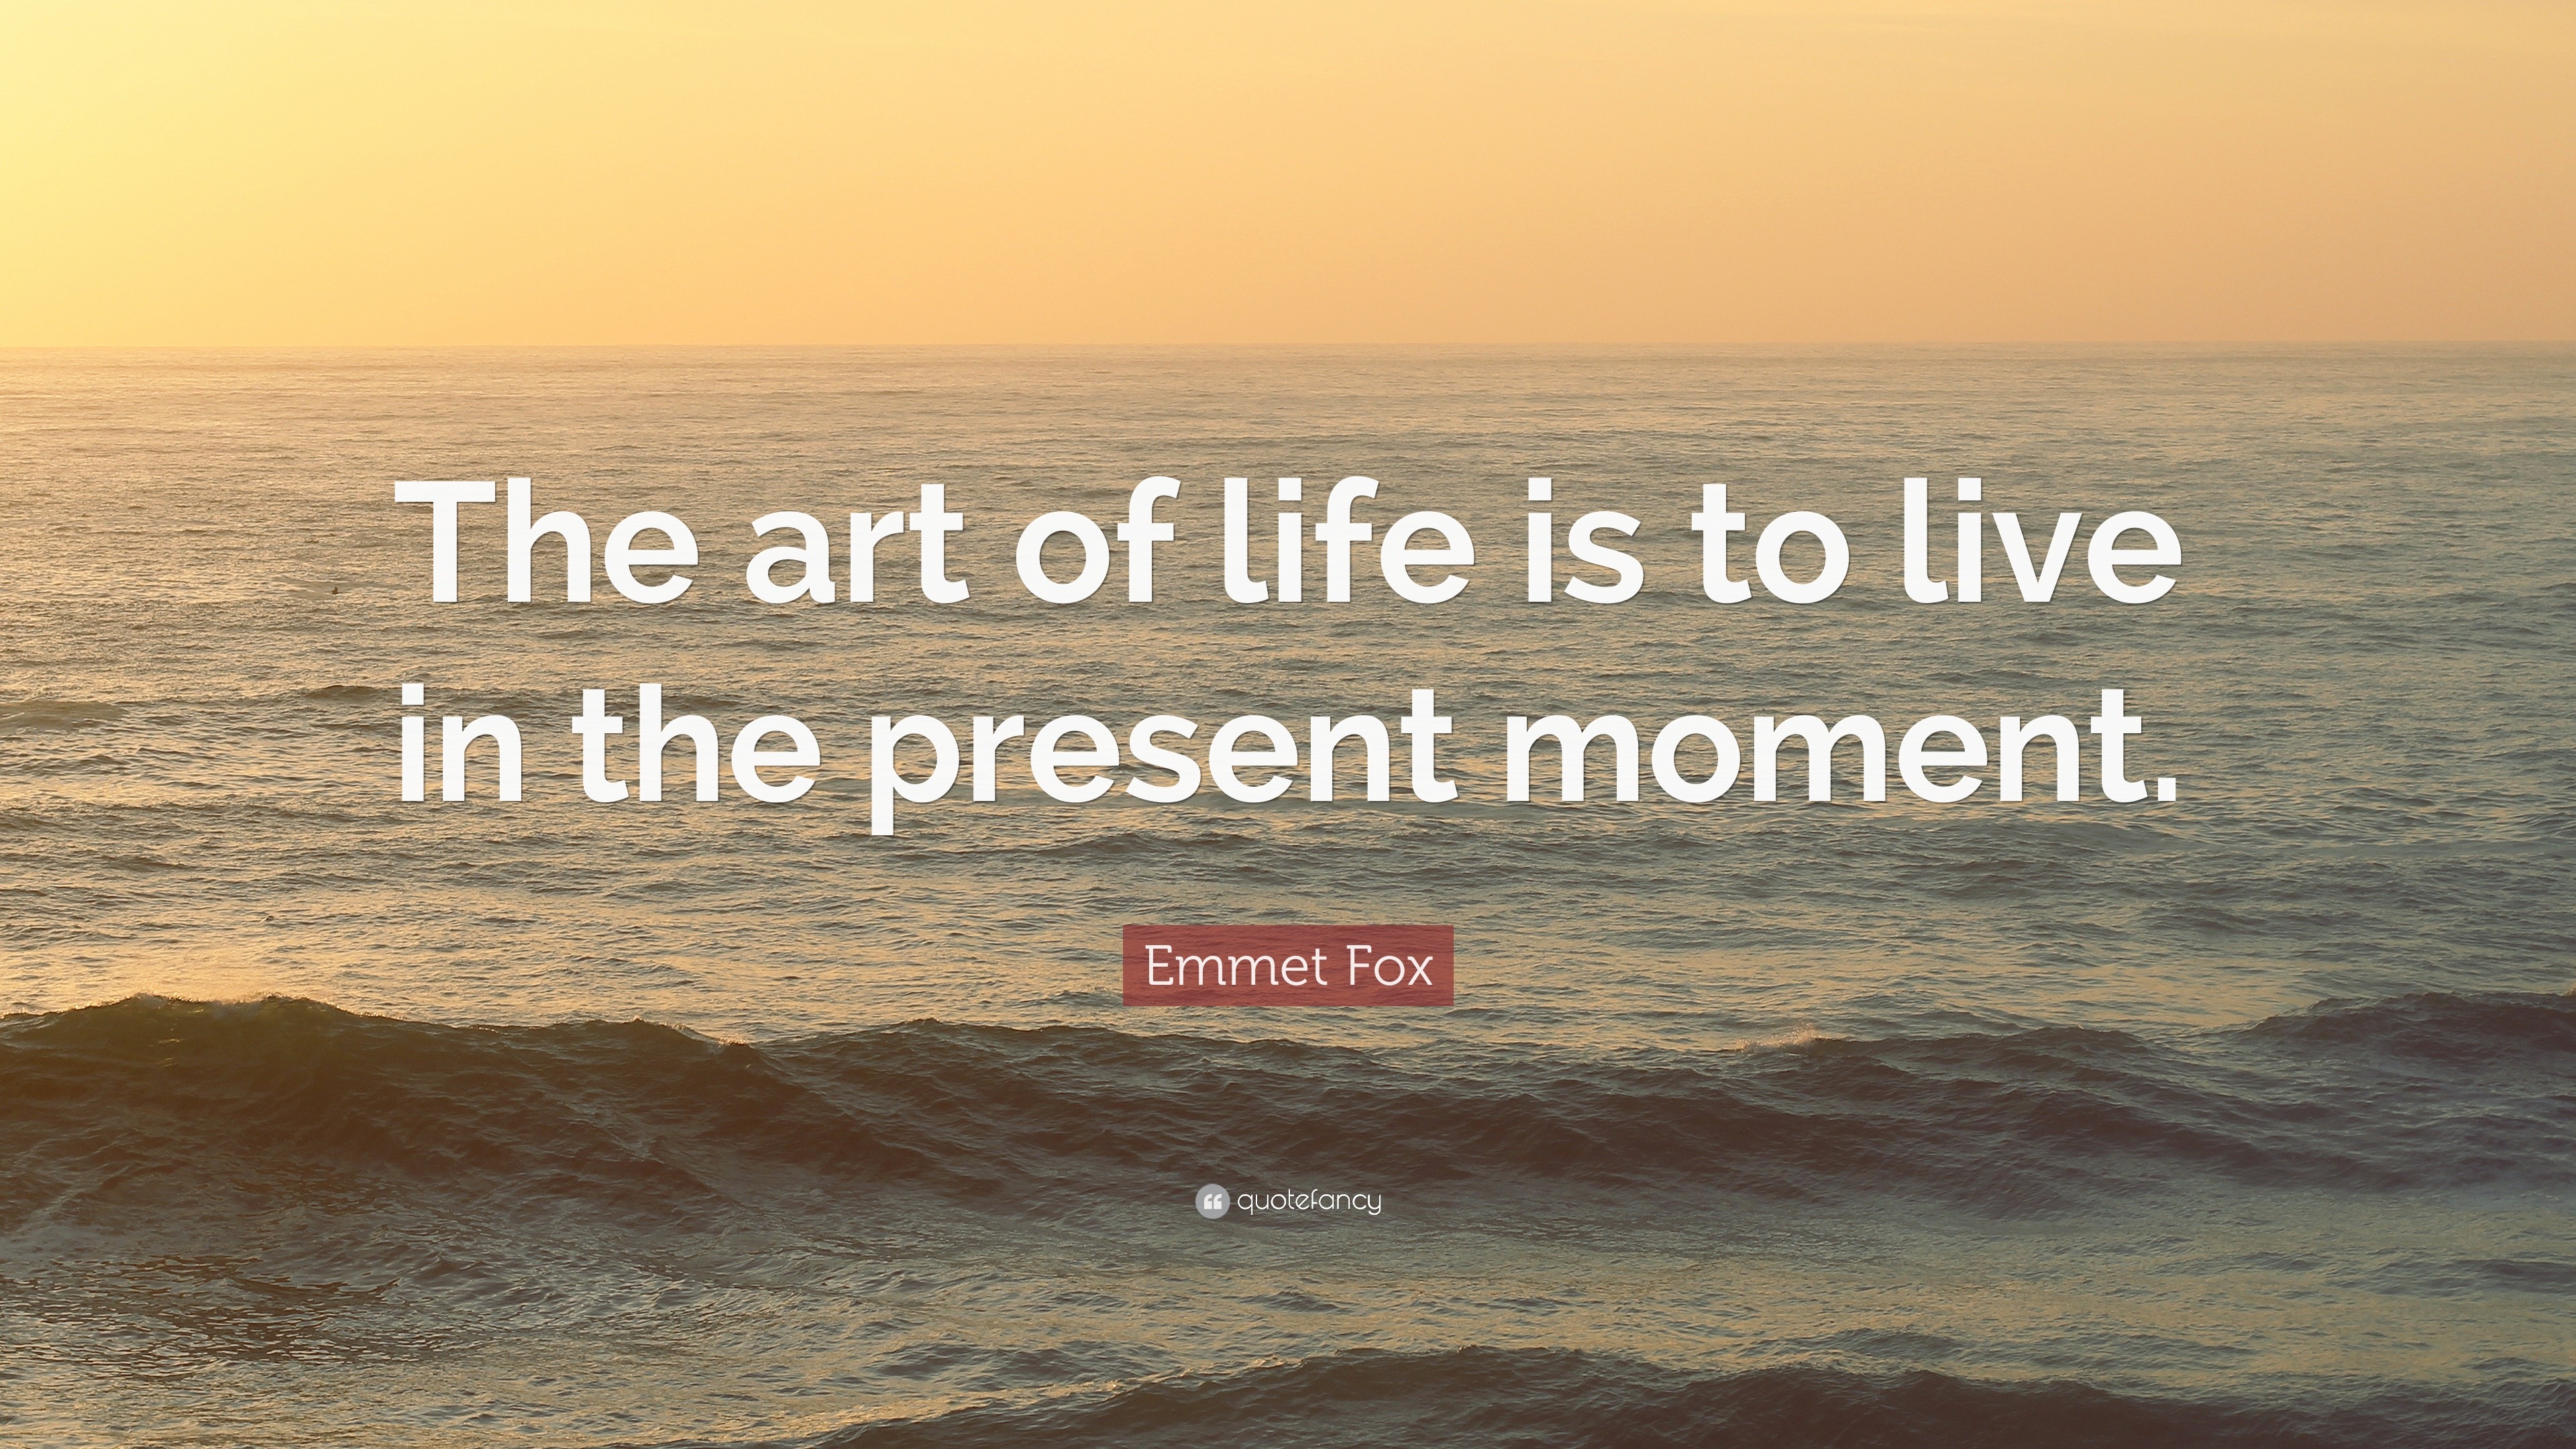 Emmet Fox Quote “The art of life is to live in the